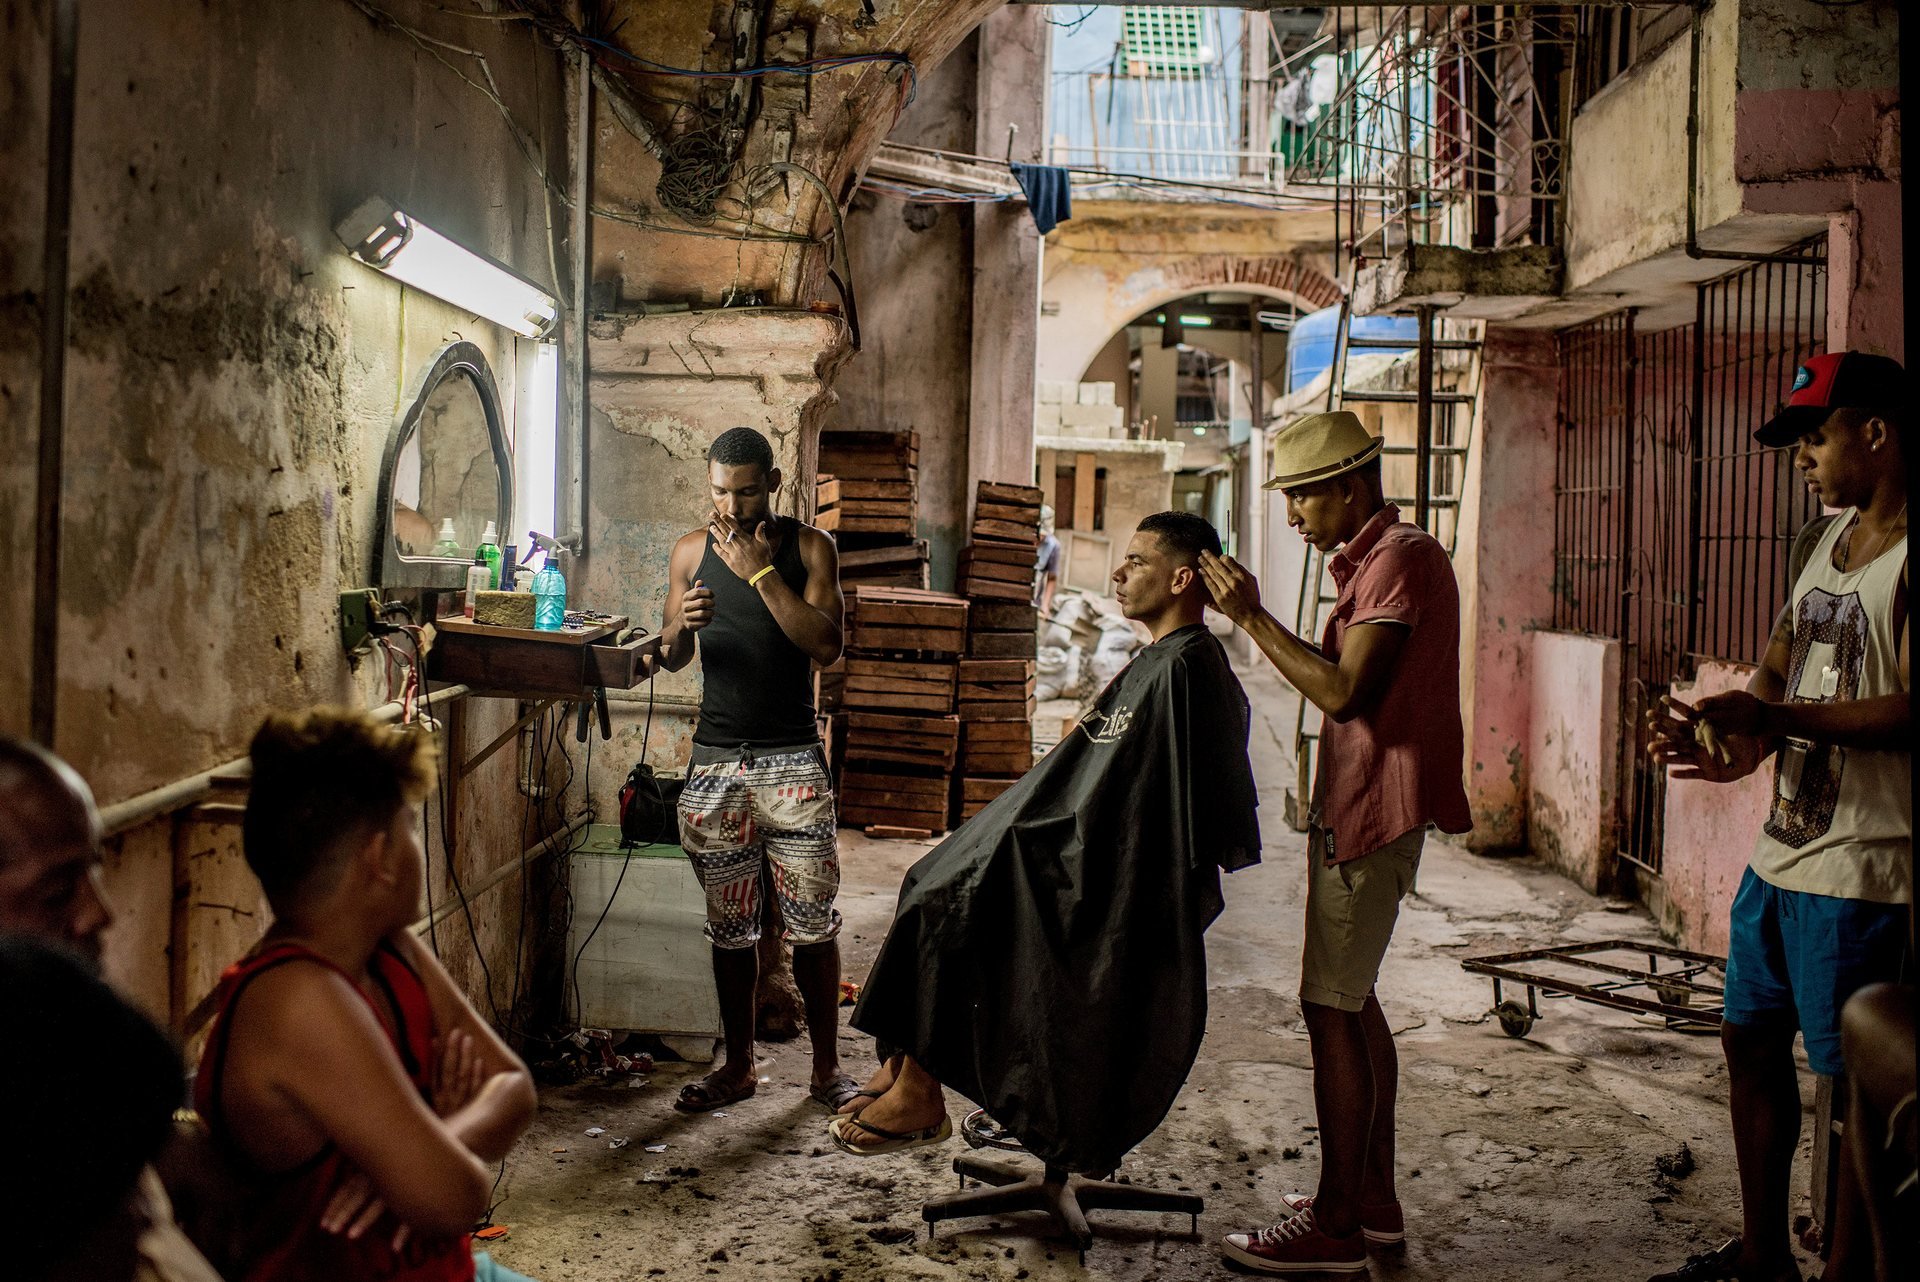 Daily life - stories, first prize A barberâs shop in Old Havana, Cuba Photograph: TomÃ¡s Munita/The New York Times